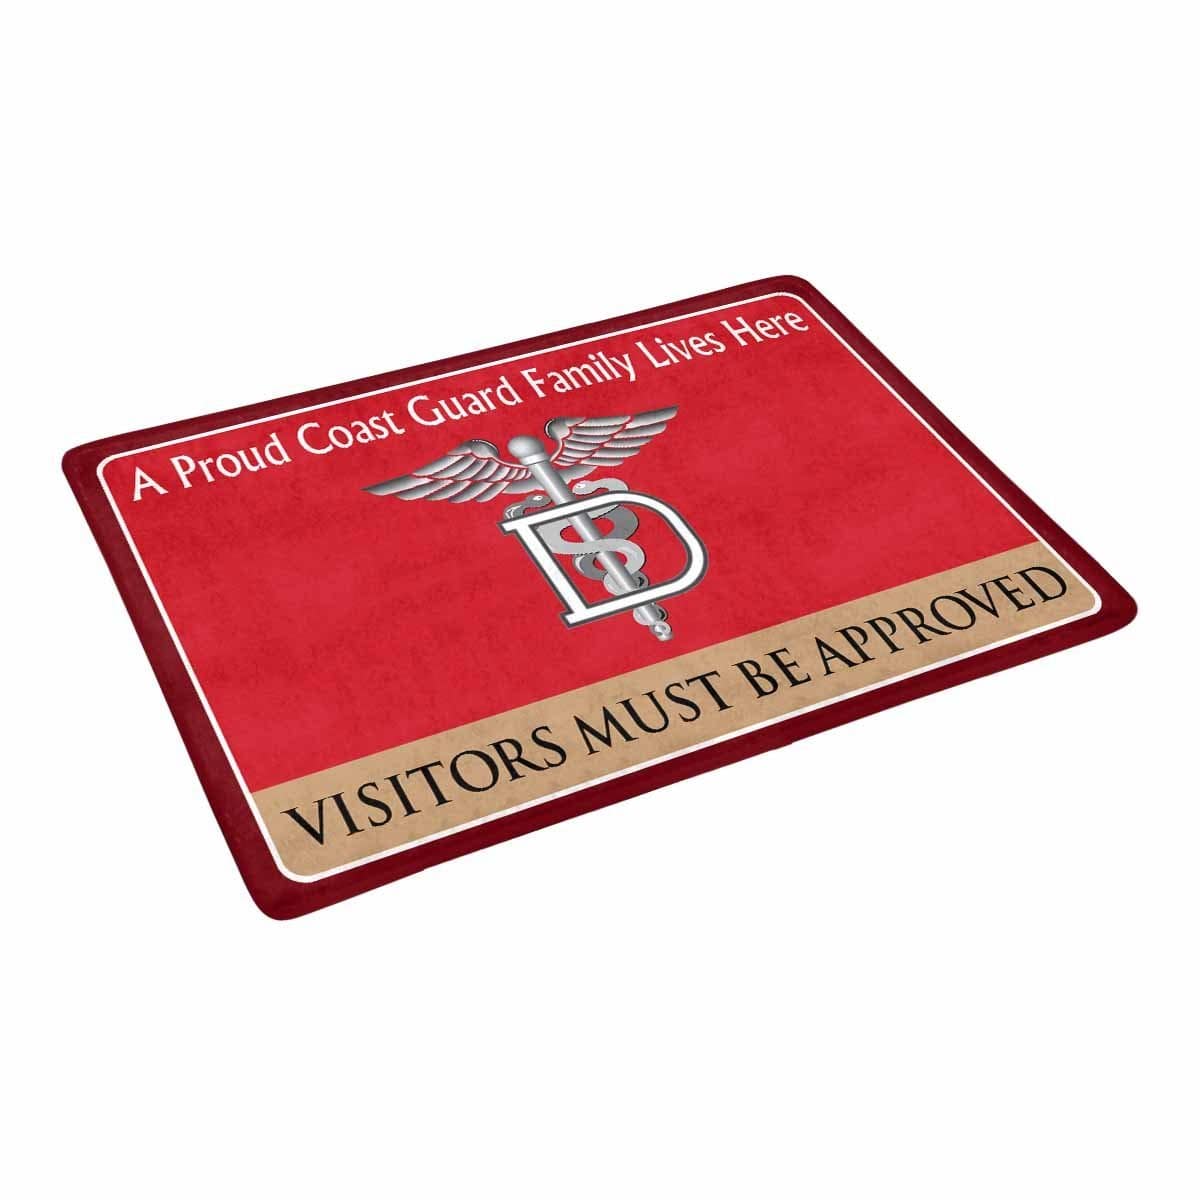 US Coast Guard Dental Technician DT Logo Family Doormat - Visitors must be approved (23.6 inches x 15.7 inches)-Doormat-USCG-Rate-Veterans Nation